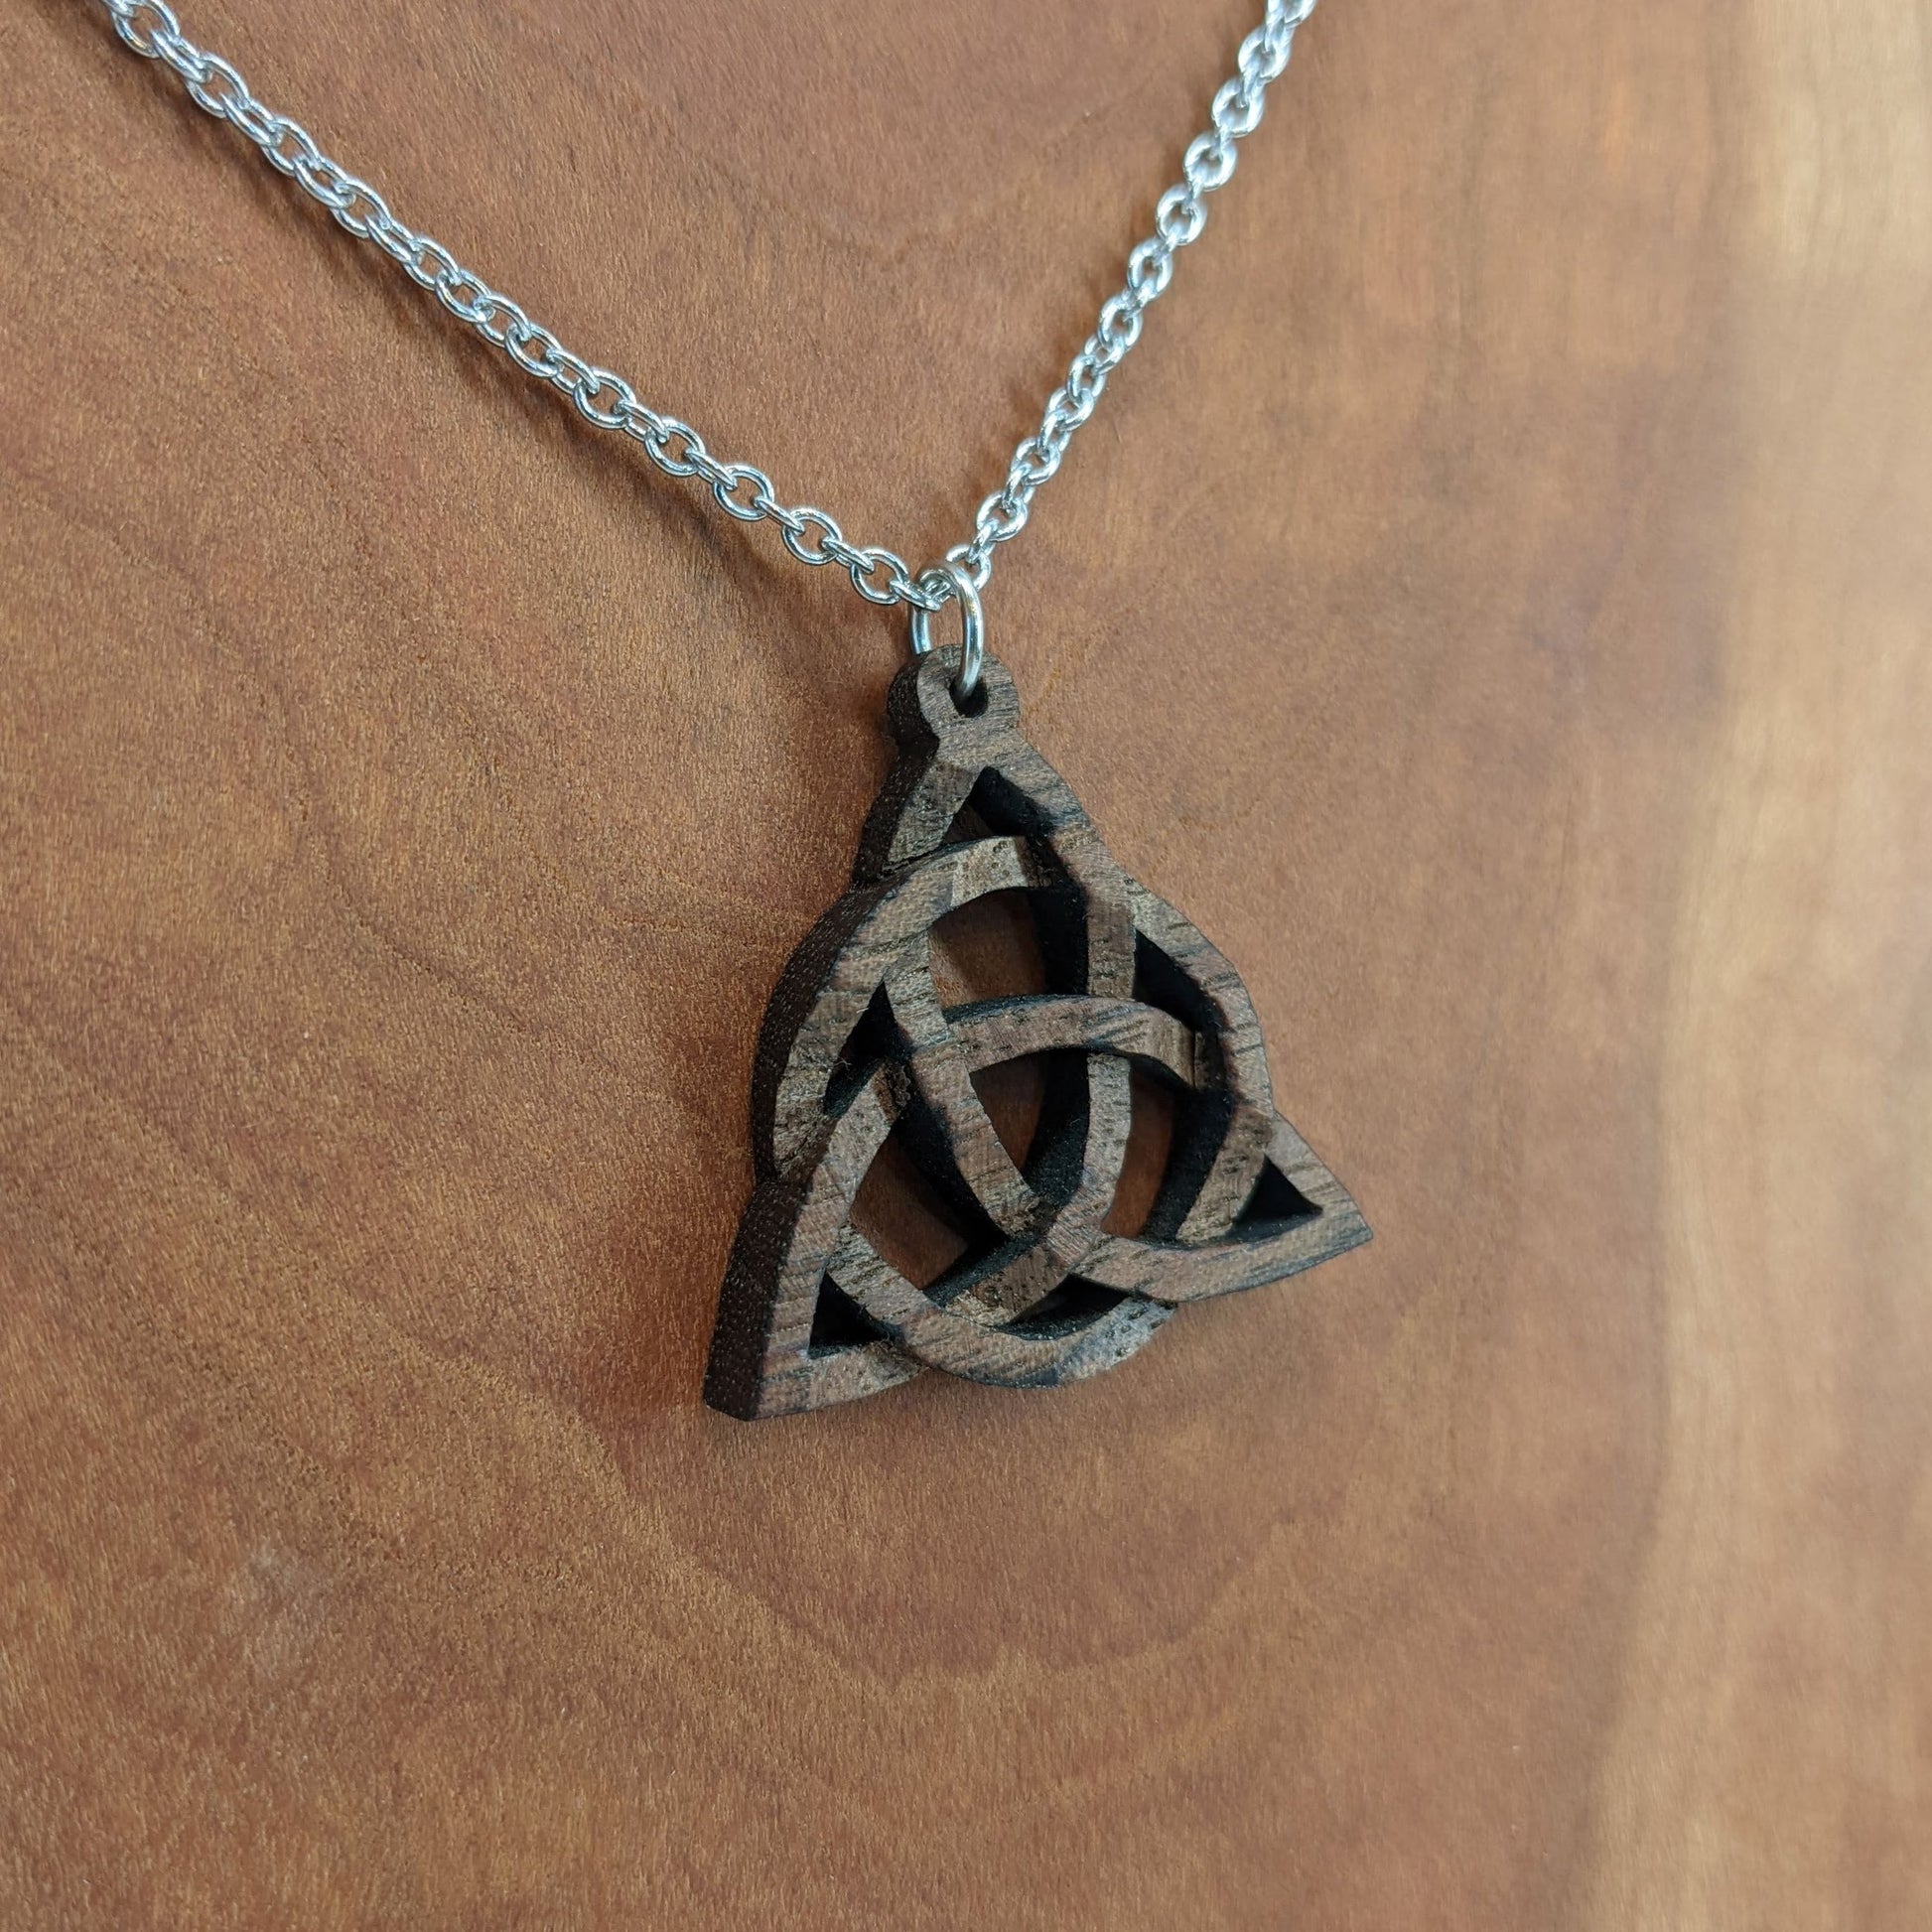 Wooden necklace pendant created in the style of a Celtic woven trinity symbol. Made from dark walnut. Hanging from a silver stainless steel chain against a cherry wood background.